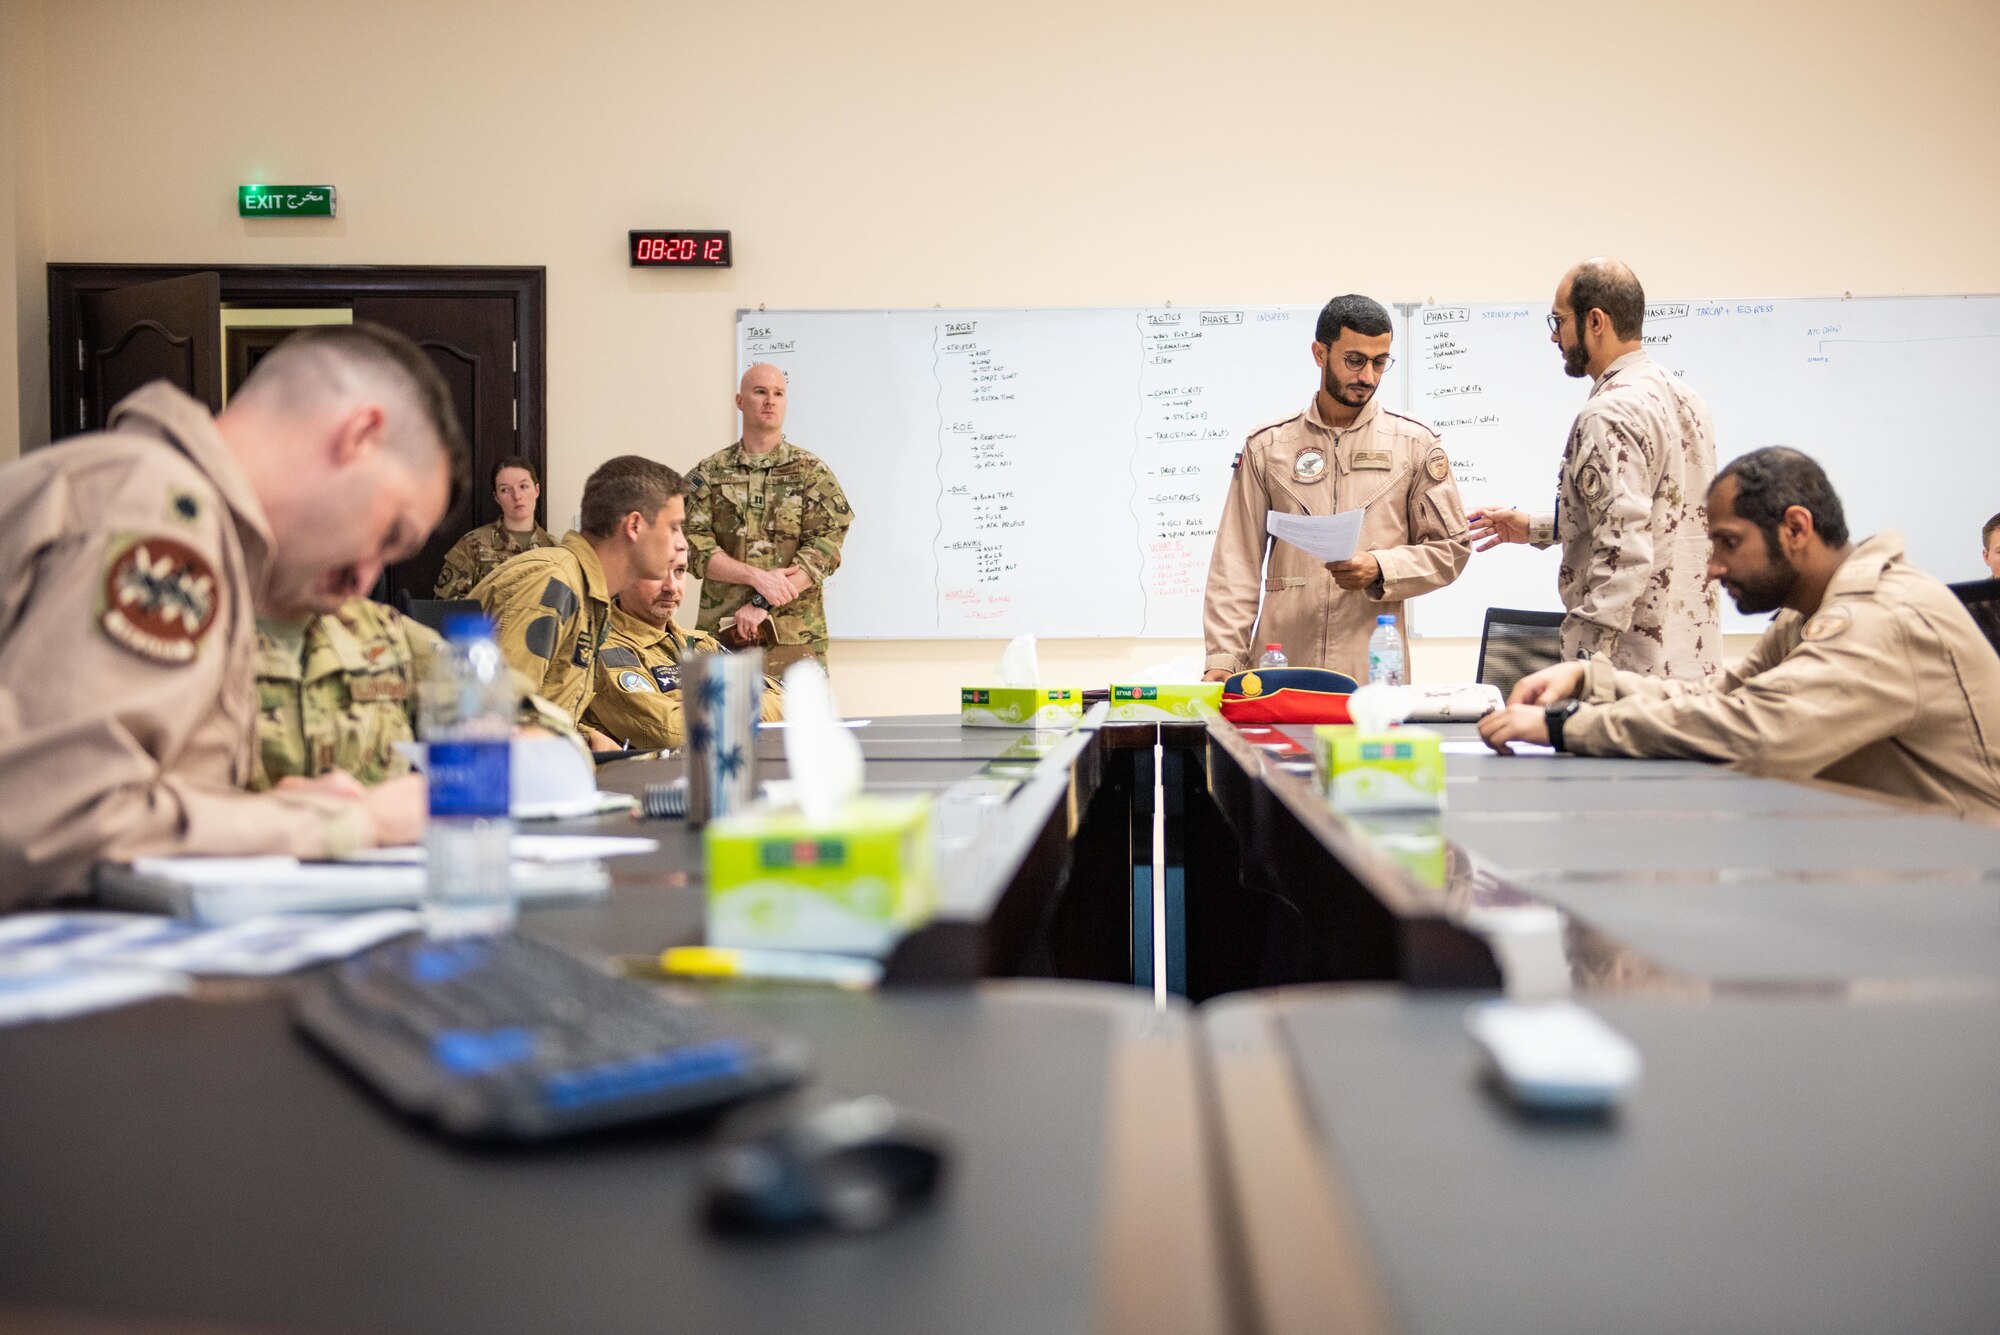 The Blue Team breaks into small groups during mission planning for a large force exercise Aug. 27, 2019, United Arab Emirates. The exercise brought French, Emirati and American forces together to build partnerships, tactical capabilities and interoperability with allies. (U.S. Air Force photo by Staff Sgt. Chris Thornbury)